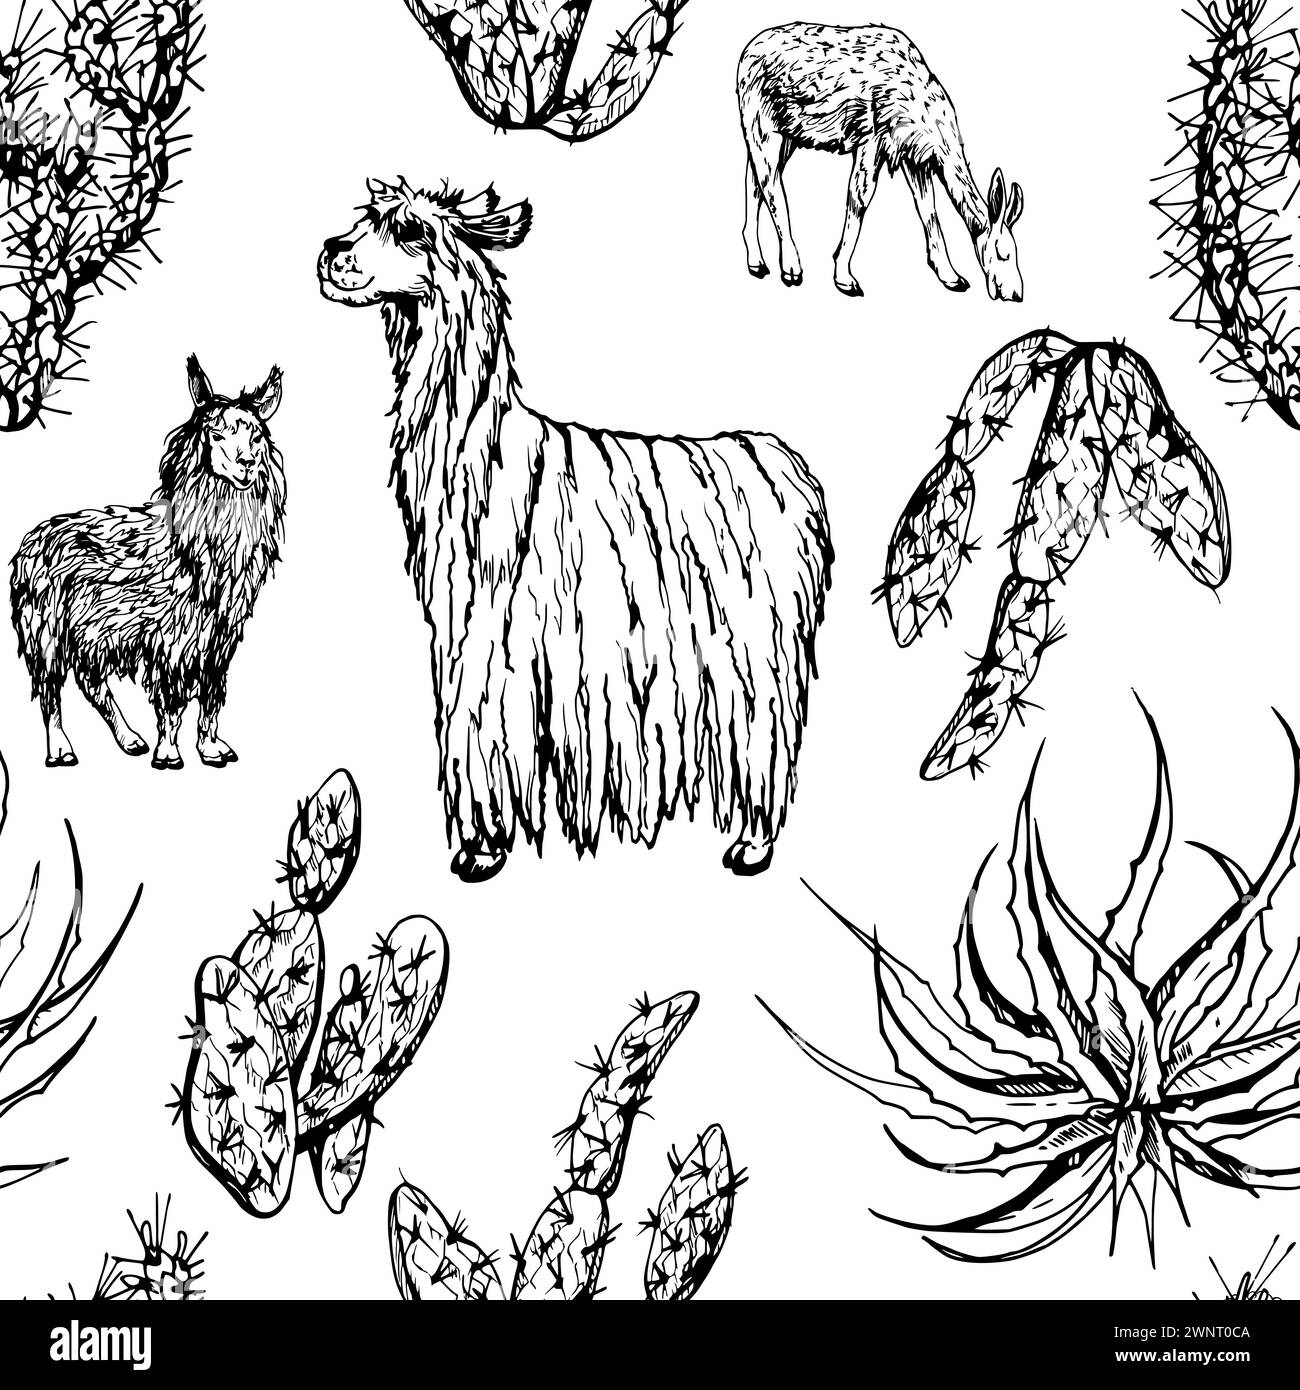 Hand drawn ink vector illustration, nature desert plant succulent cactus aloe agave, llama alpaca wool animals. Seamless pattern isolated on white Stock Vector